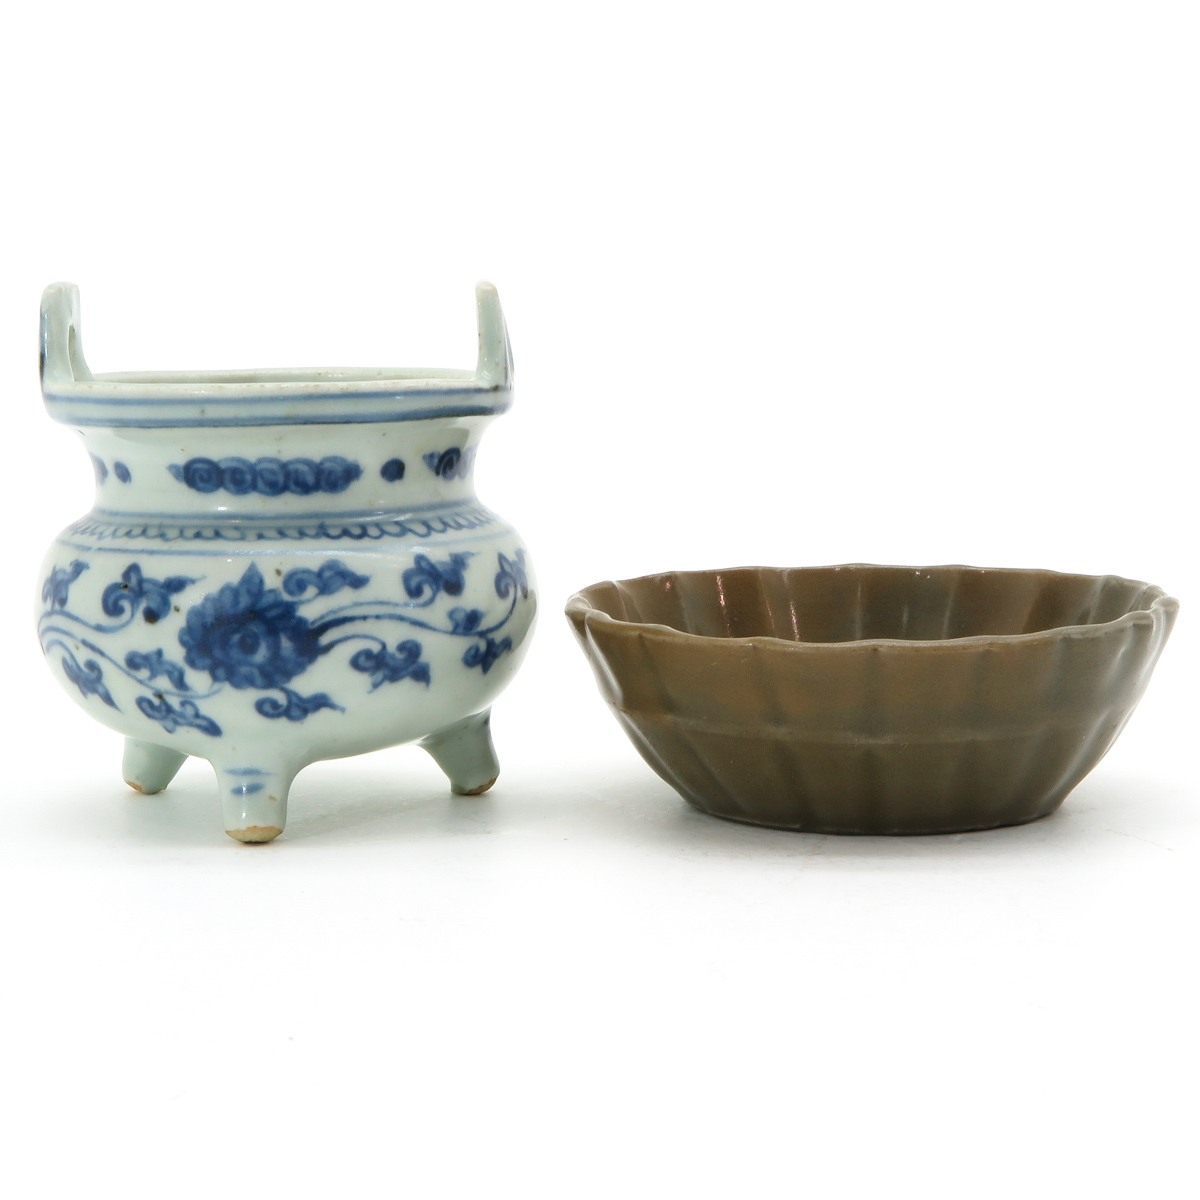 A Blue and White Decor Censer with Celadon Tray - Image 3 of 6